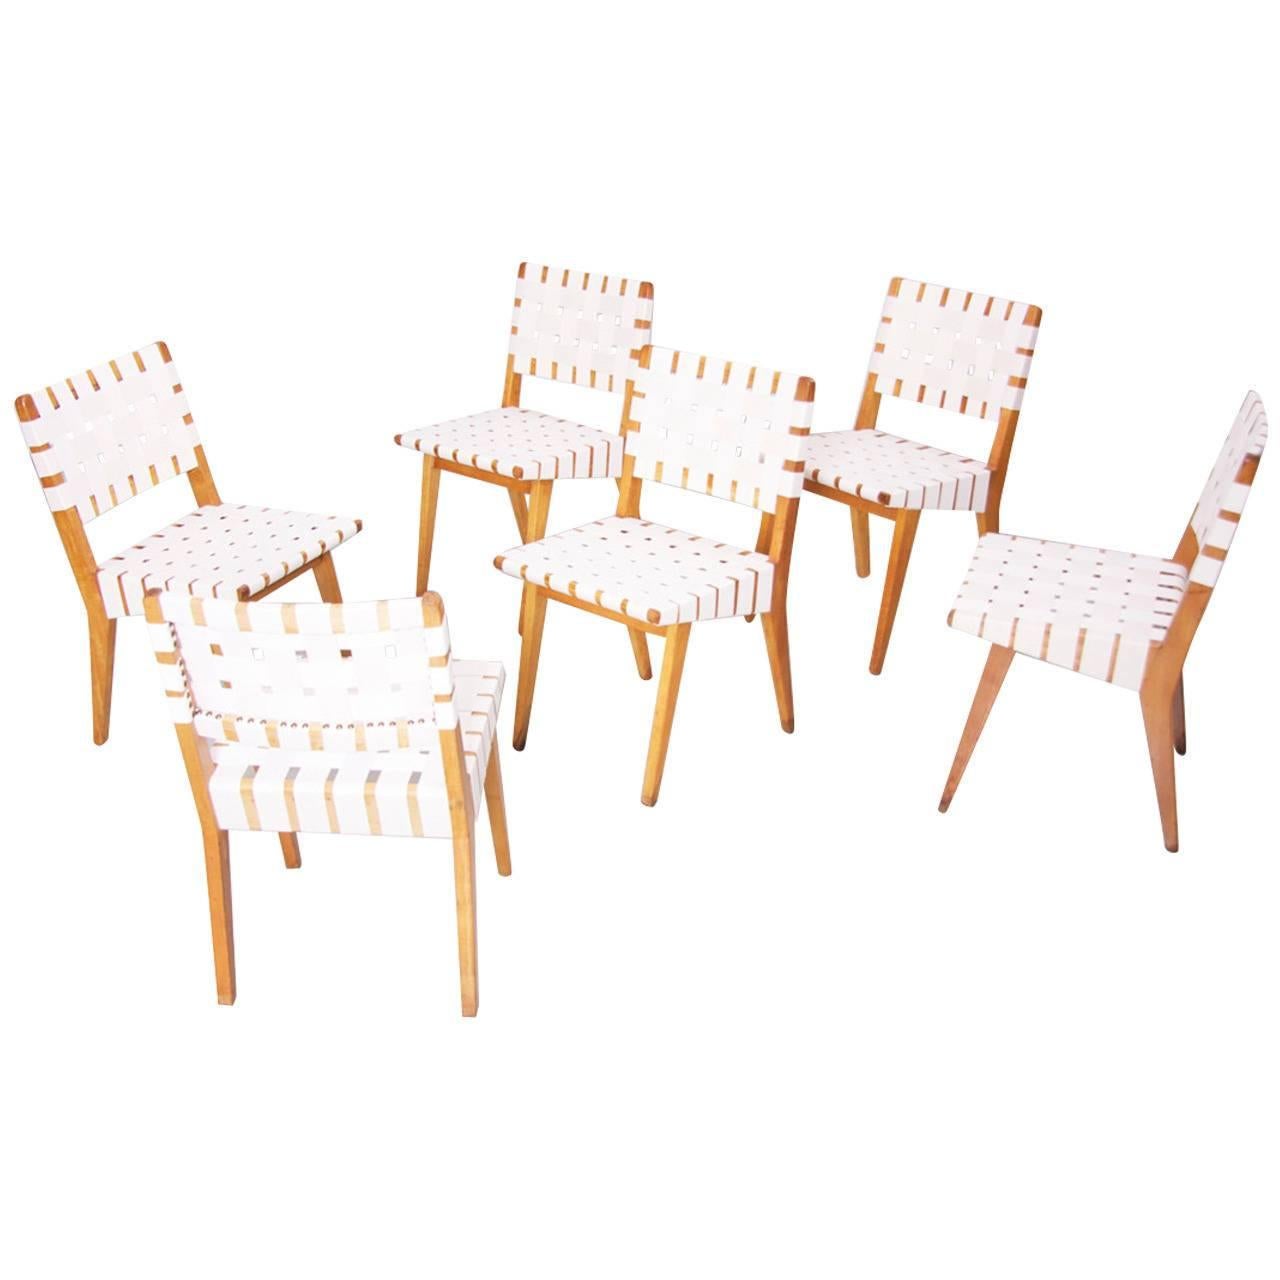 Set of ten side chairs by Jens Risom with new webbing and in solid birch. Signed!

